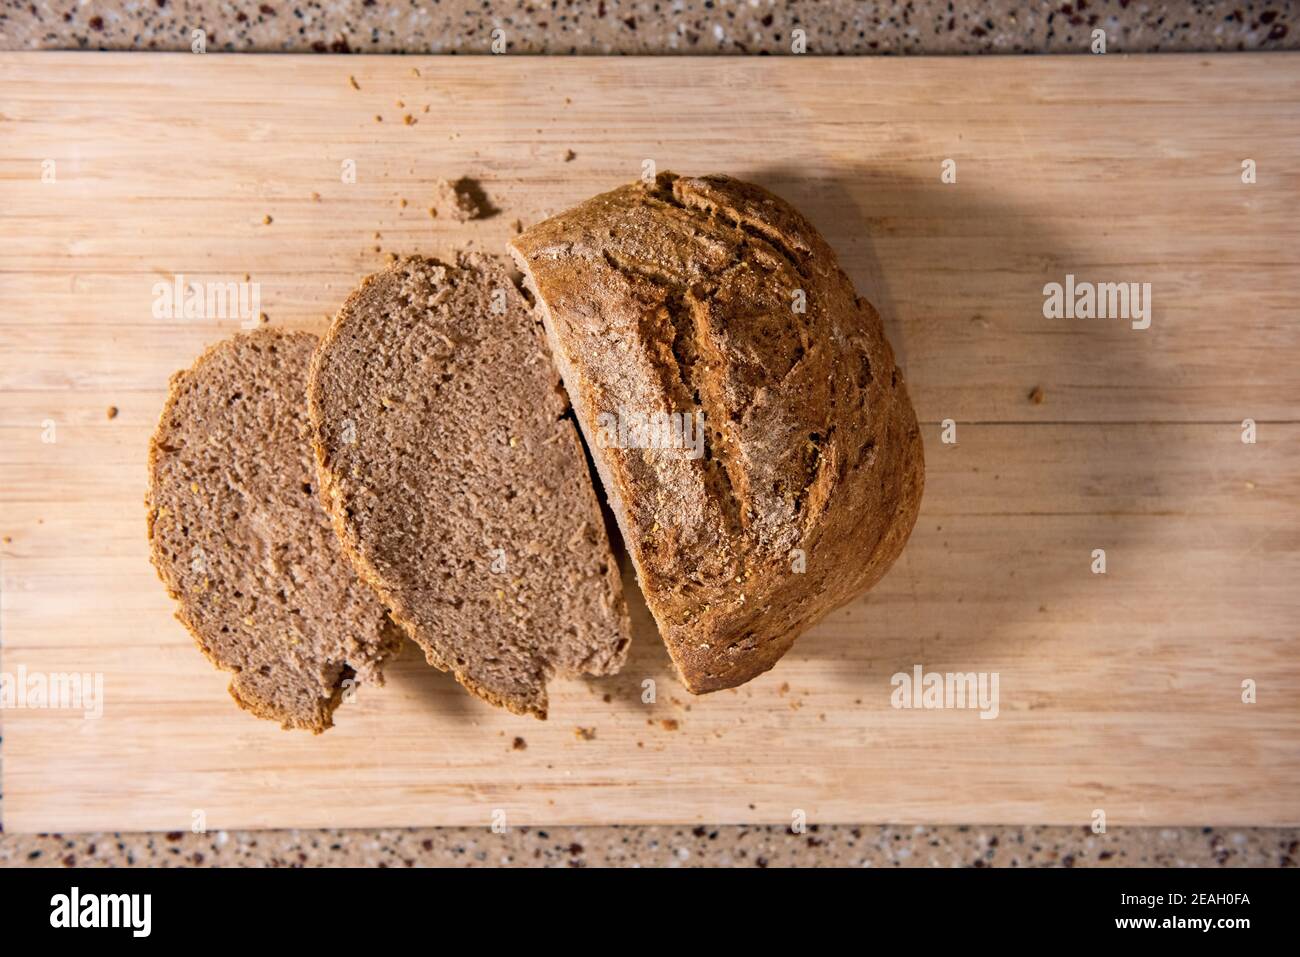 A freshly baked and sliced loaf of bread. Series step-by-step making homemade bread.  Frame 13 of 13 Stock Photo